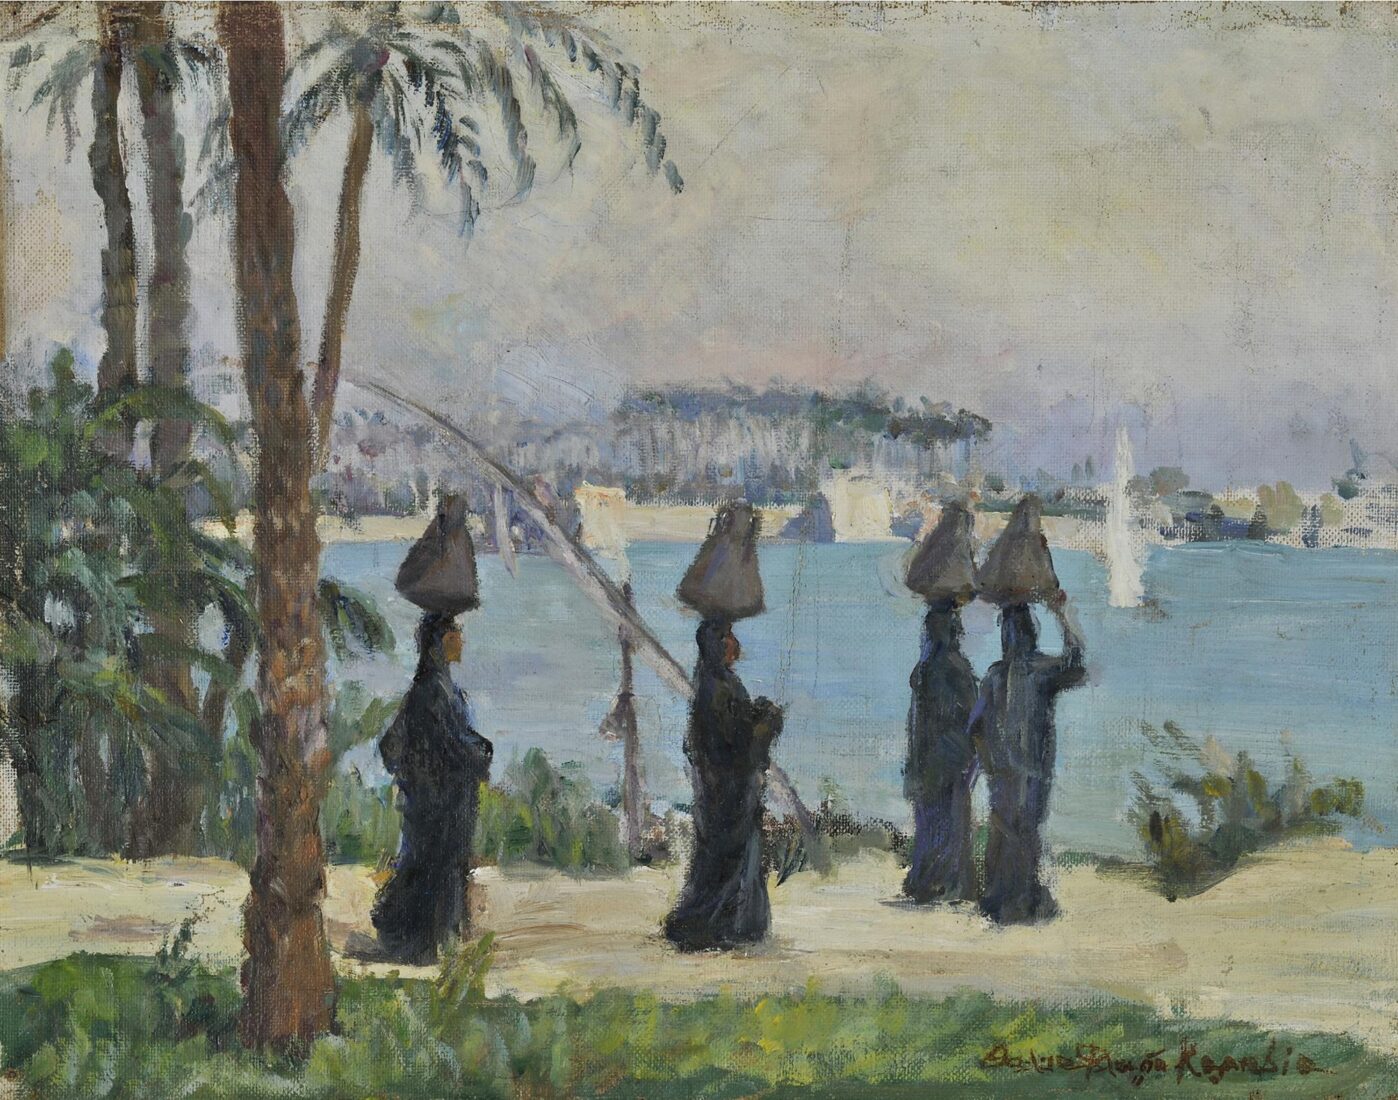 Water-Carriers on the Nile - Flora Karavia Thaleia